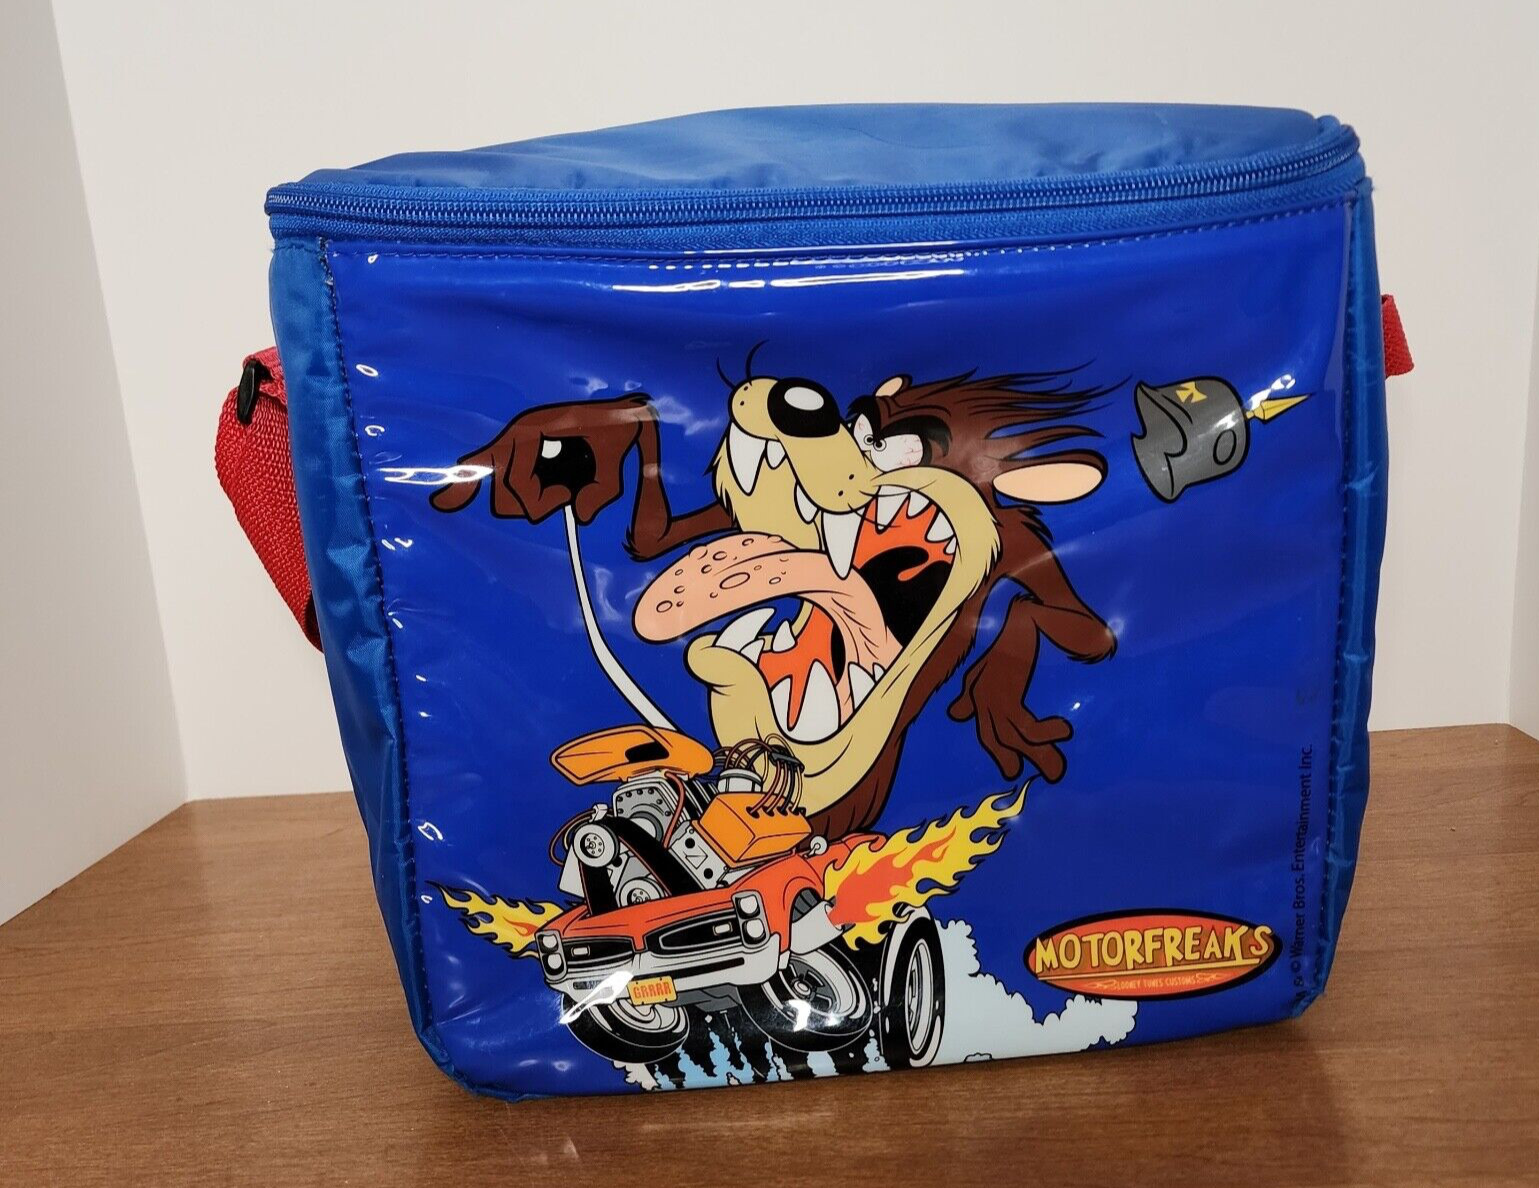 Vintage Looney TunesMotor Freaks Taz Lunch Bag Cooler Insulated